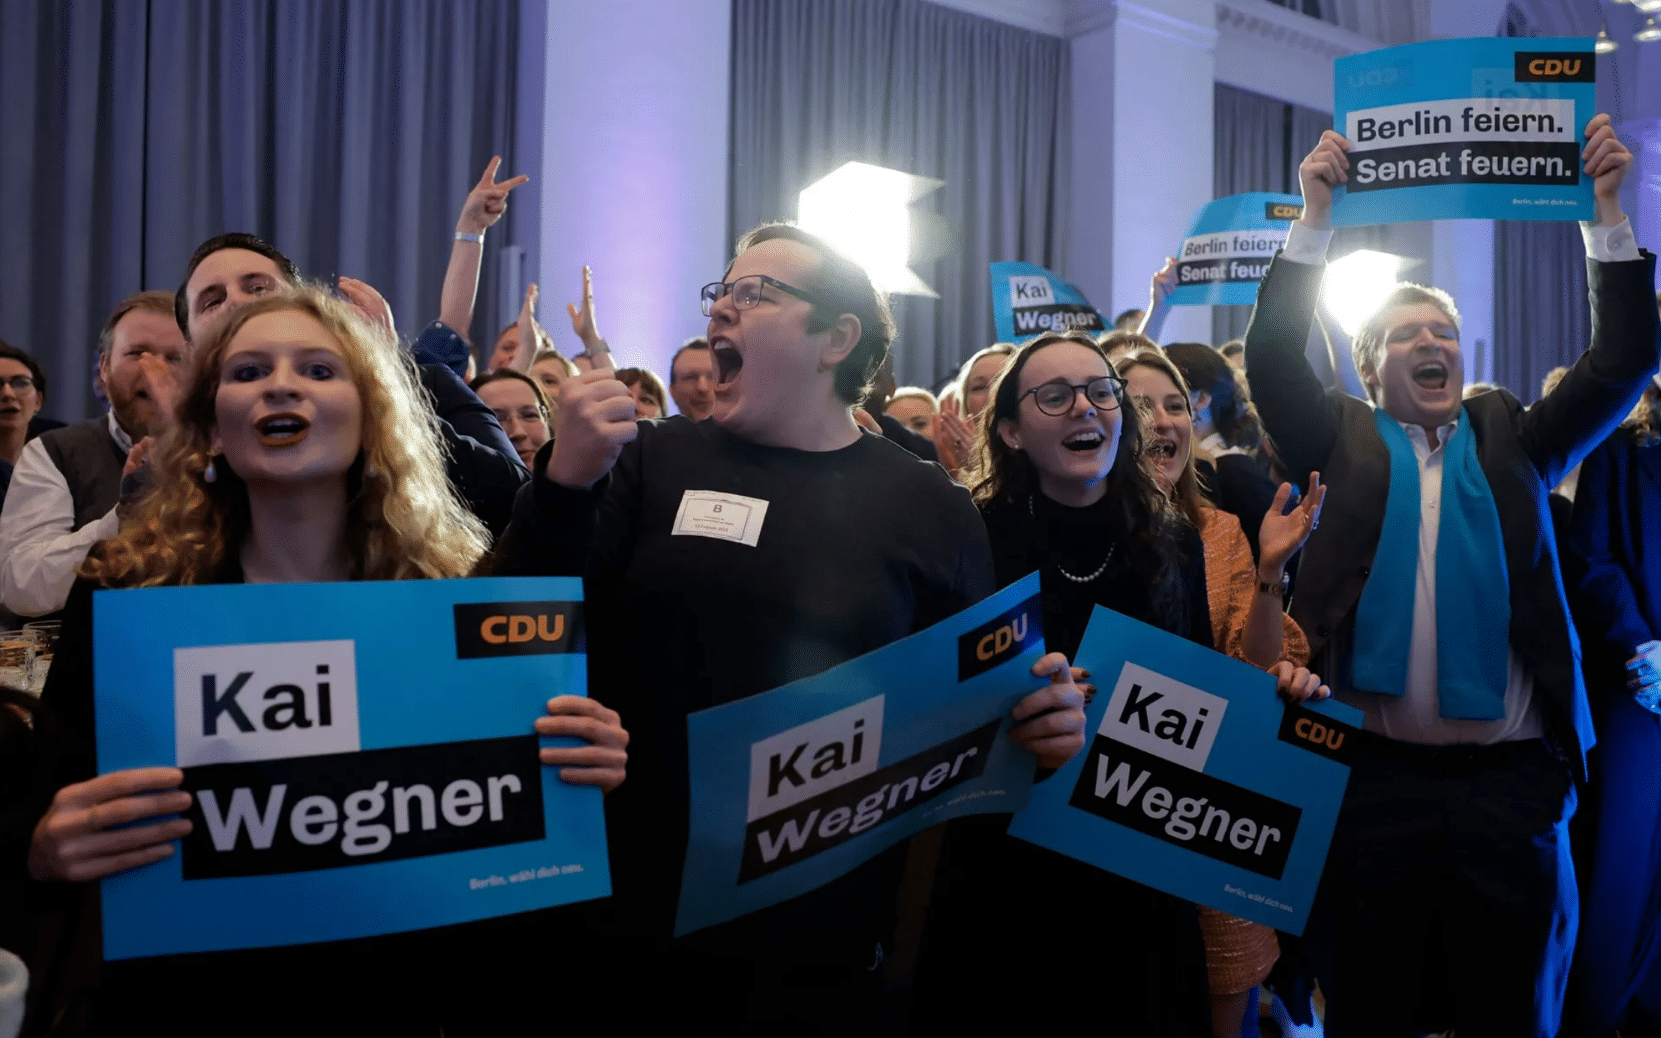 A group of excited people holding campaign signs for Kai Wegner.